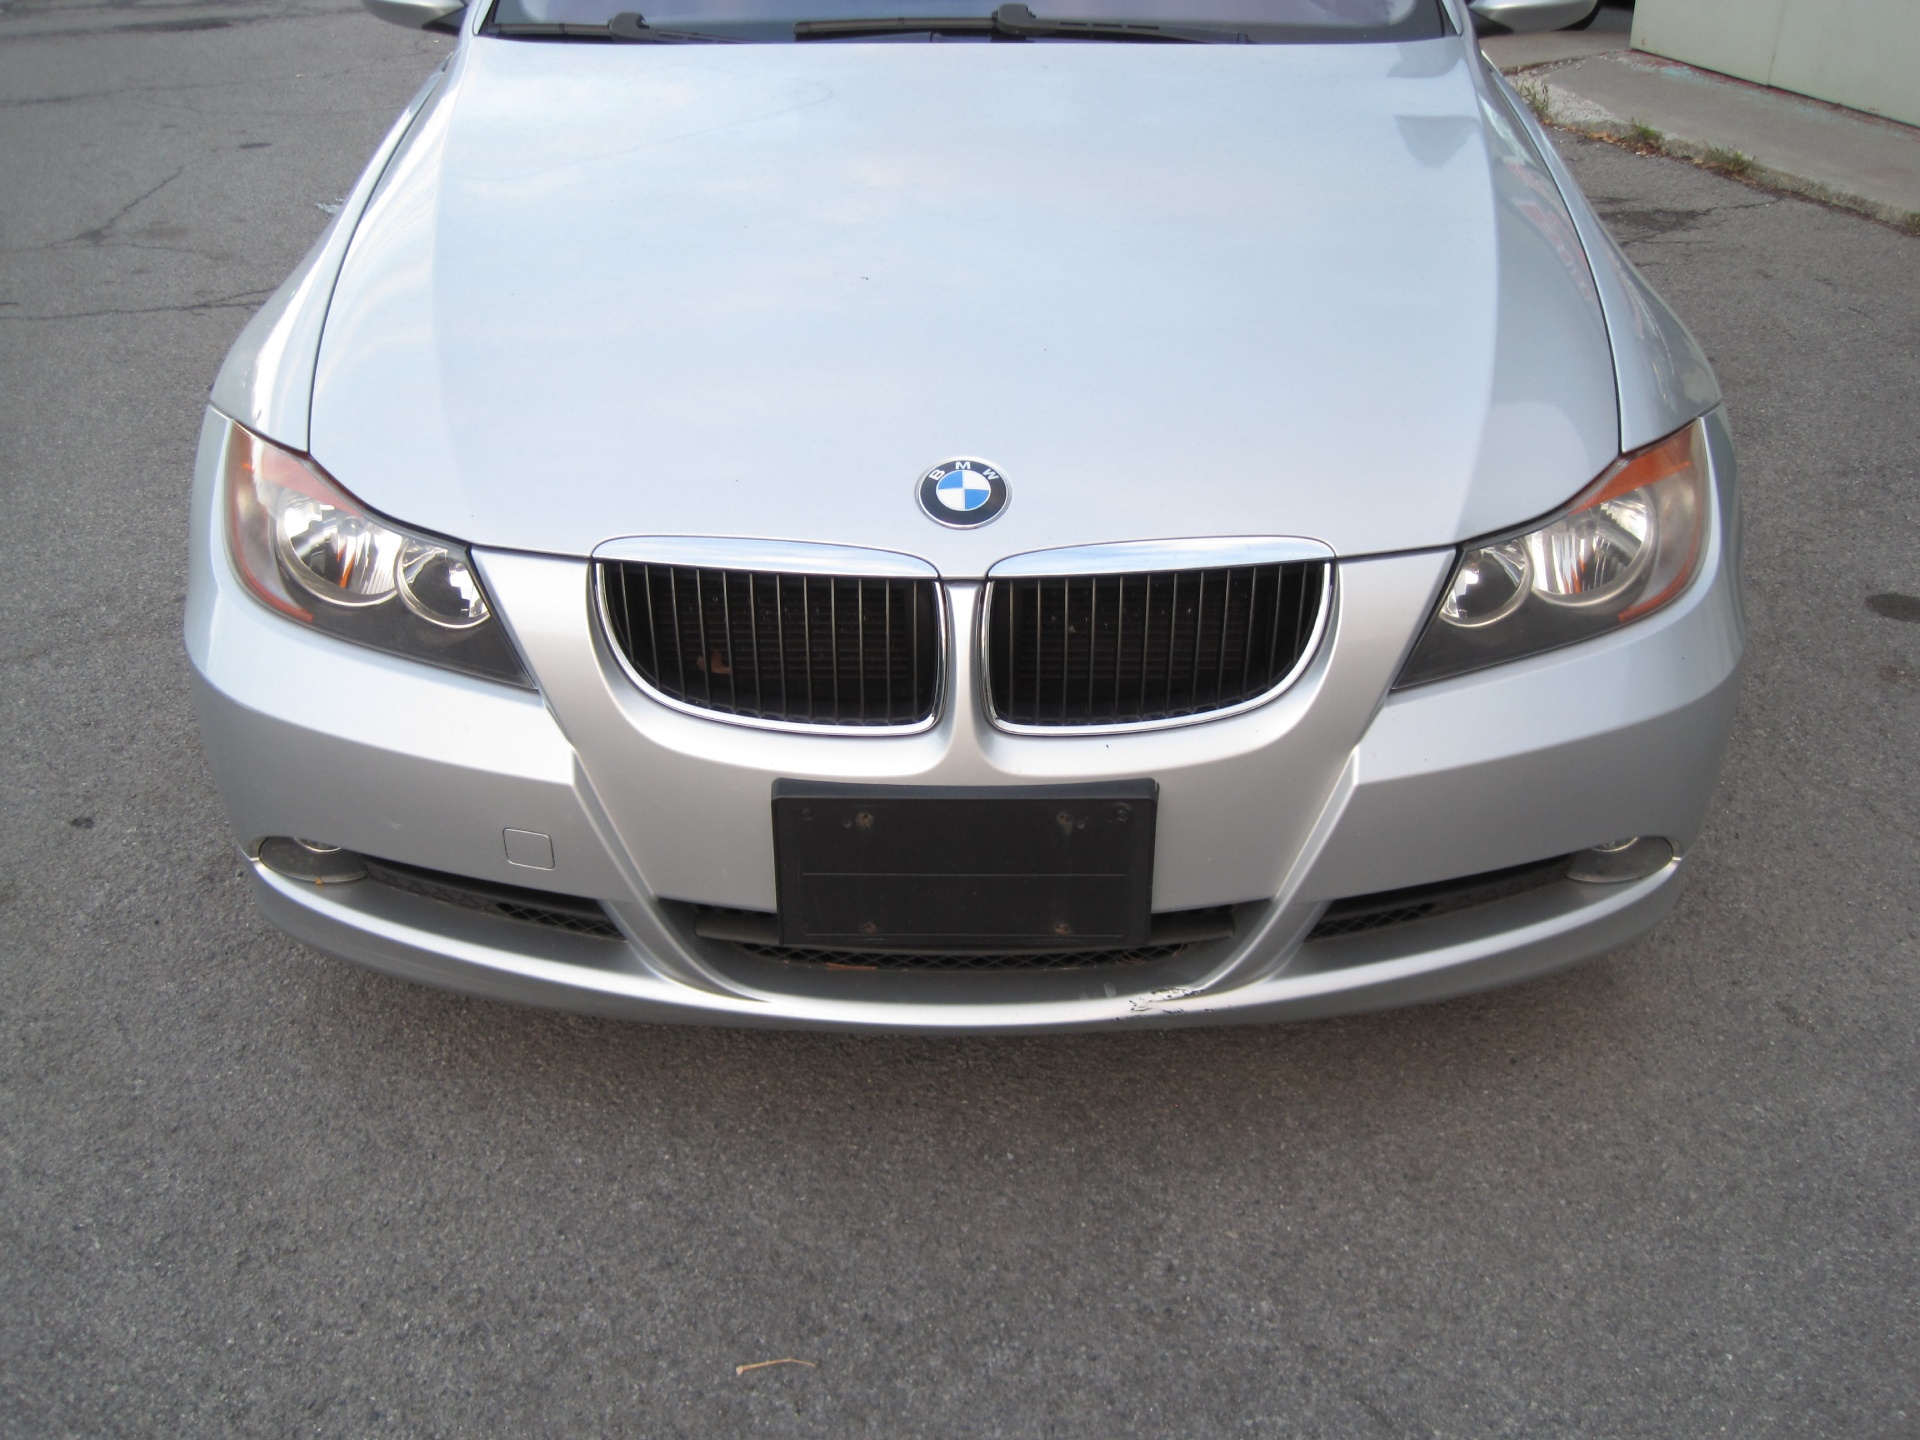 Used 2007 Titanium Silver Metallic BMW 3 Series 328i AUTOMATIC,JUST TRADED IN WITH US FOR A CONVERTIBLE | Albany, NY